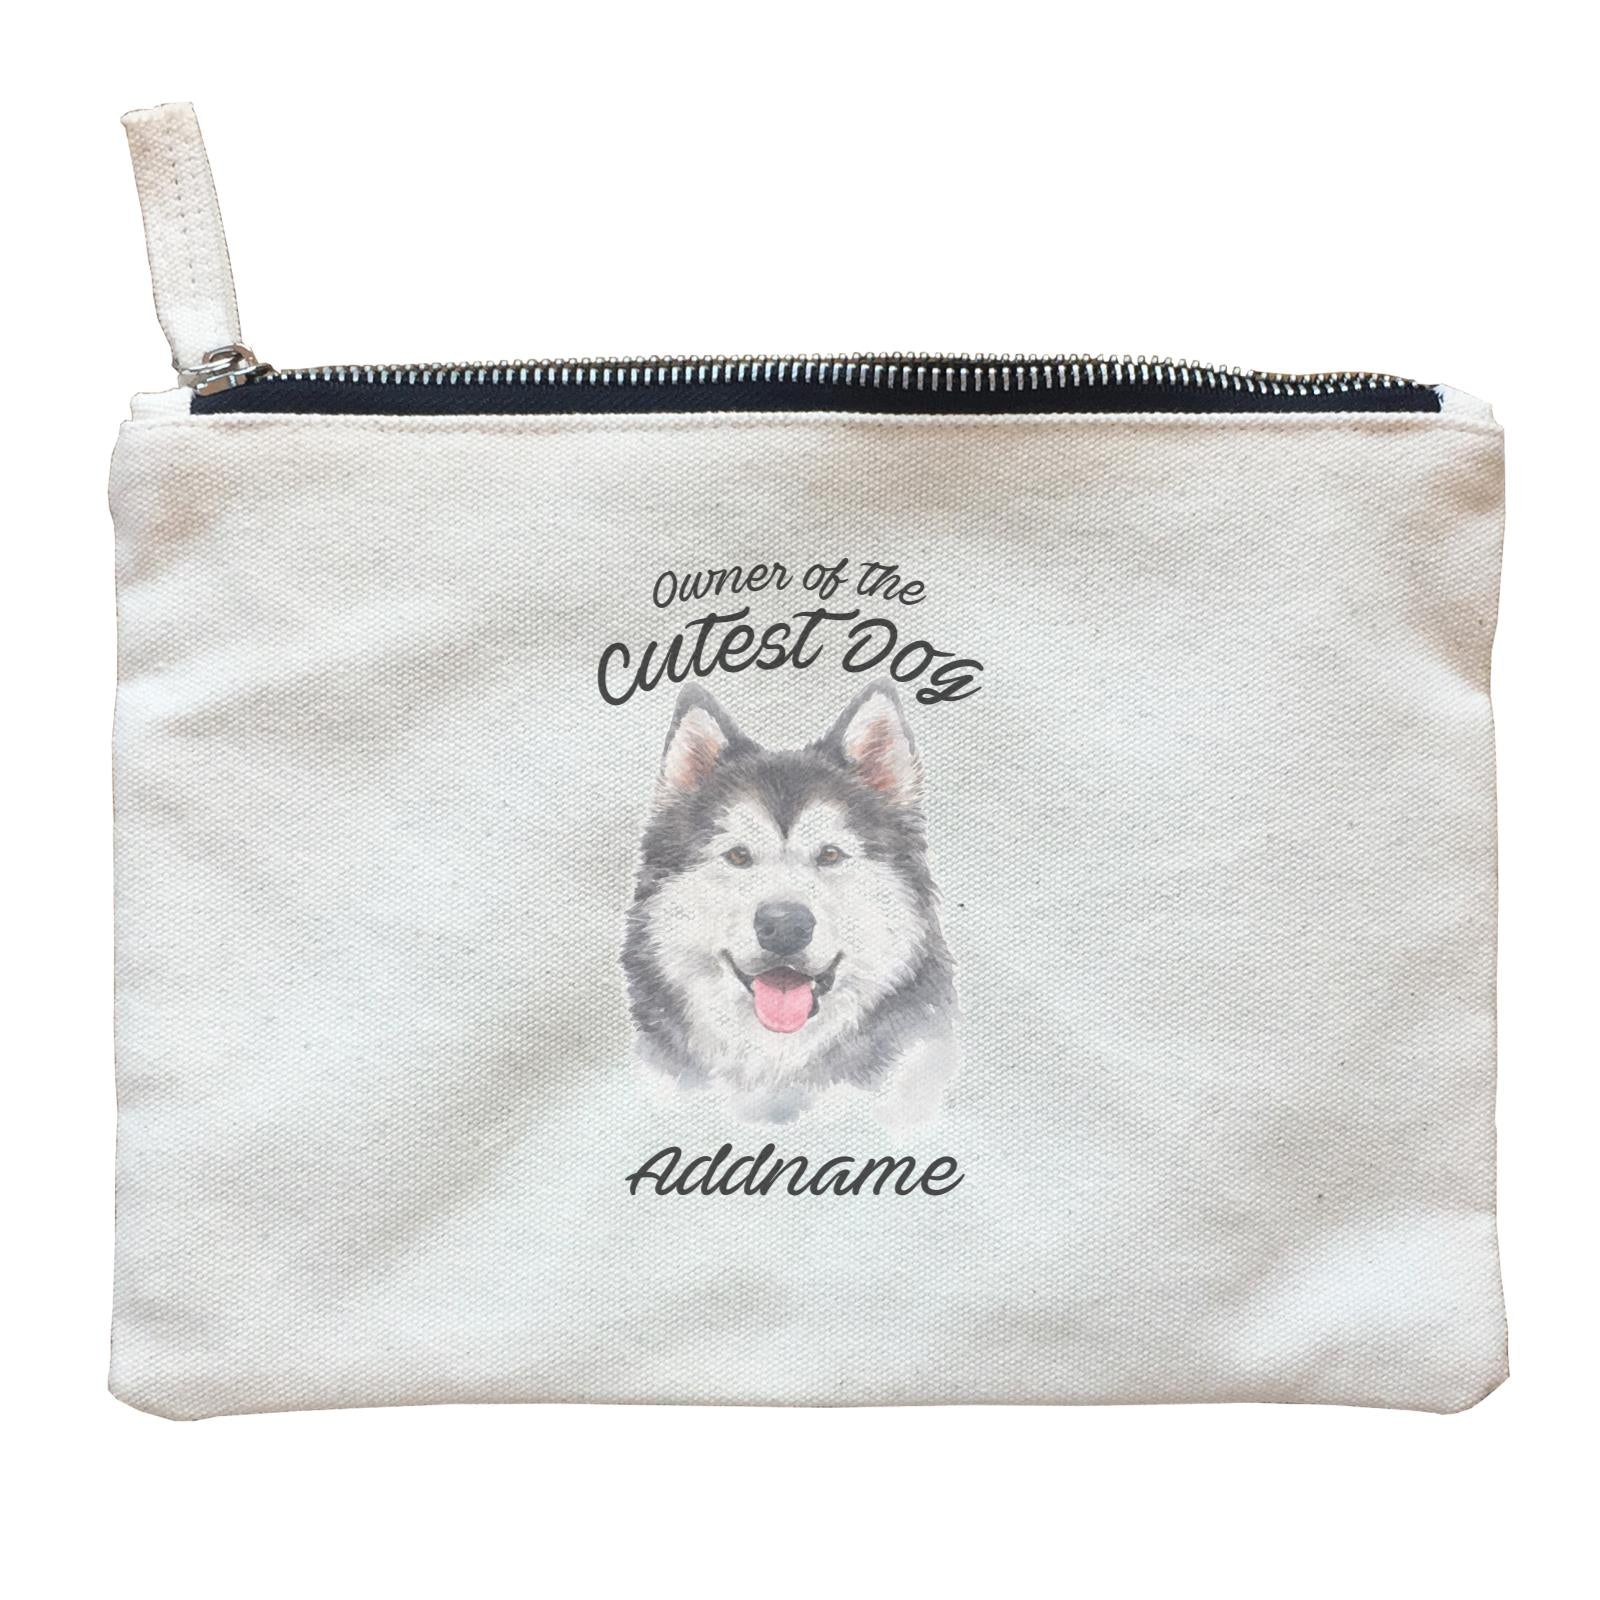 Watercolor Dog Owner Of The Cutest Dog Siberian Husky Smile Addname Zipper Pouch